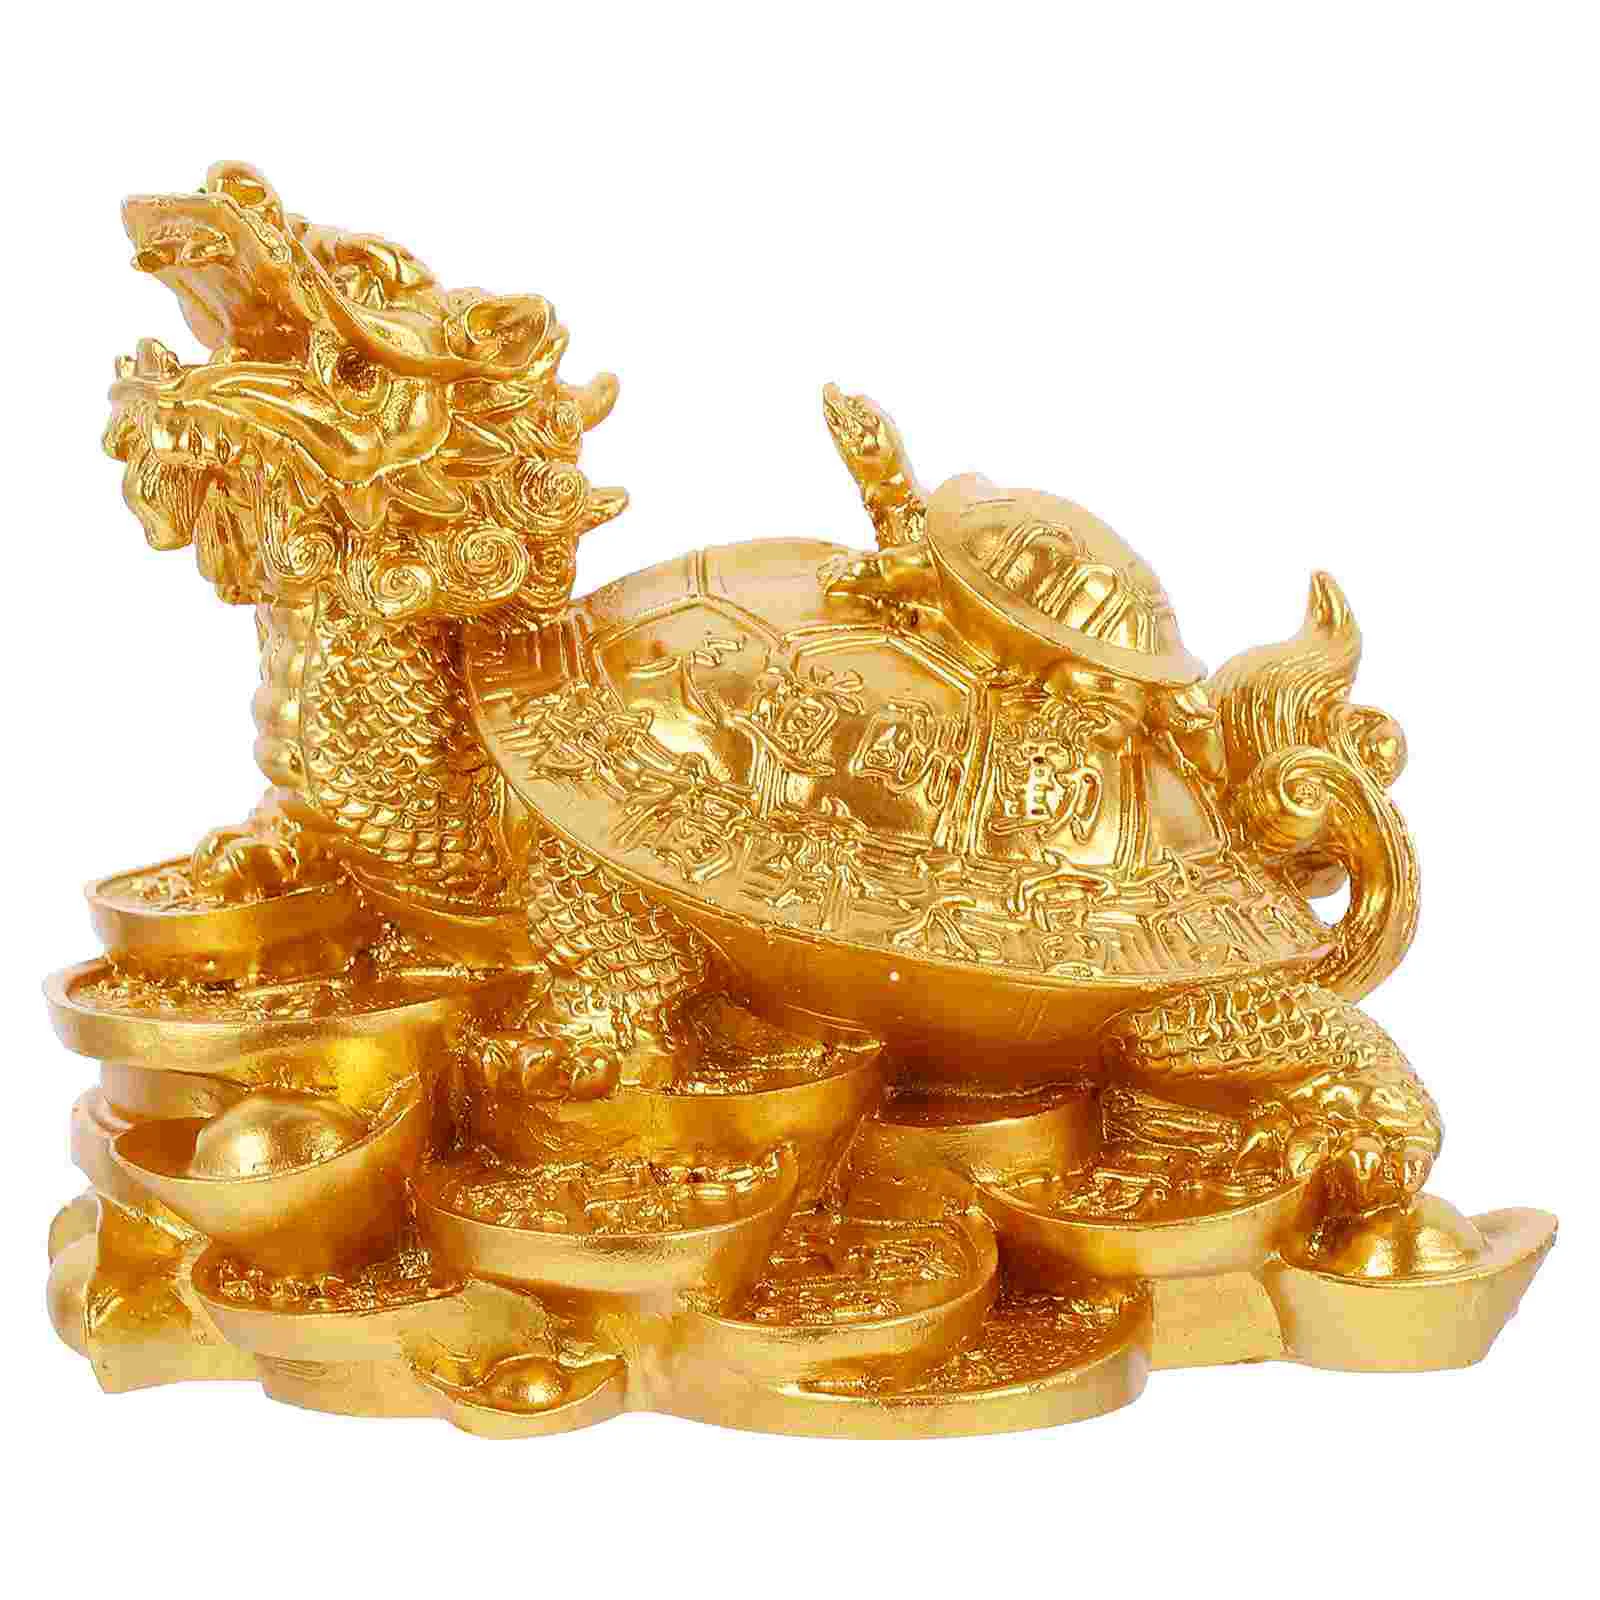 

Statue Dragon Tortoise Golden Decor Year Turtle Gold Figurine New Wealth Toad Sculpture Chinese Table Frog Decoration Gift Lucky